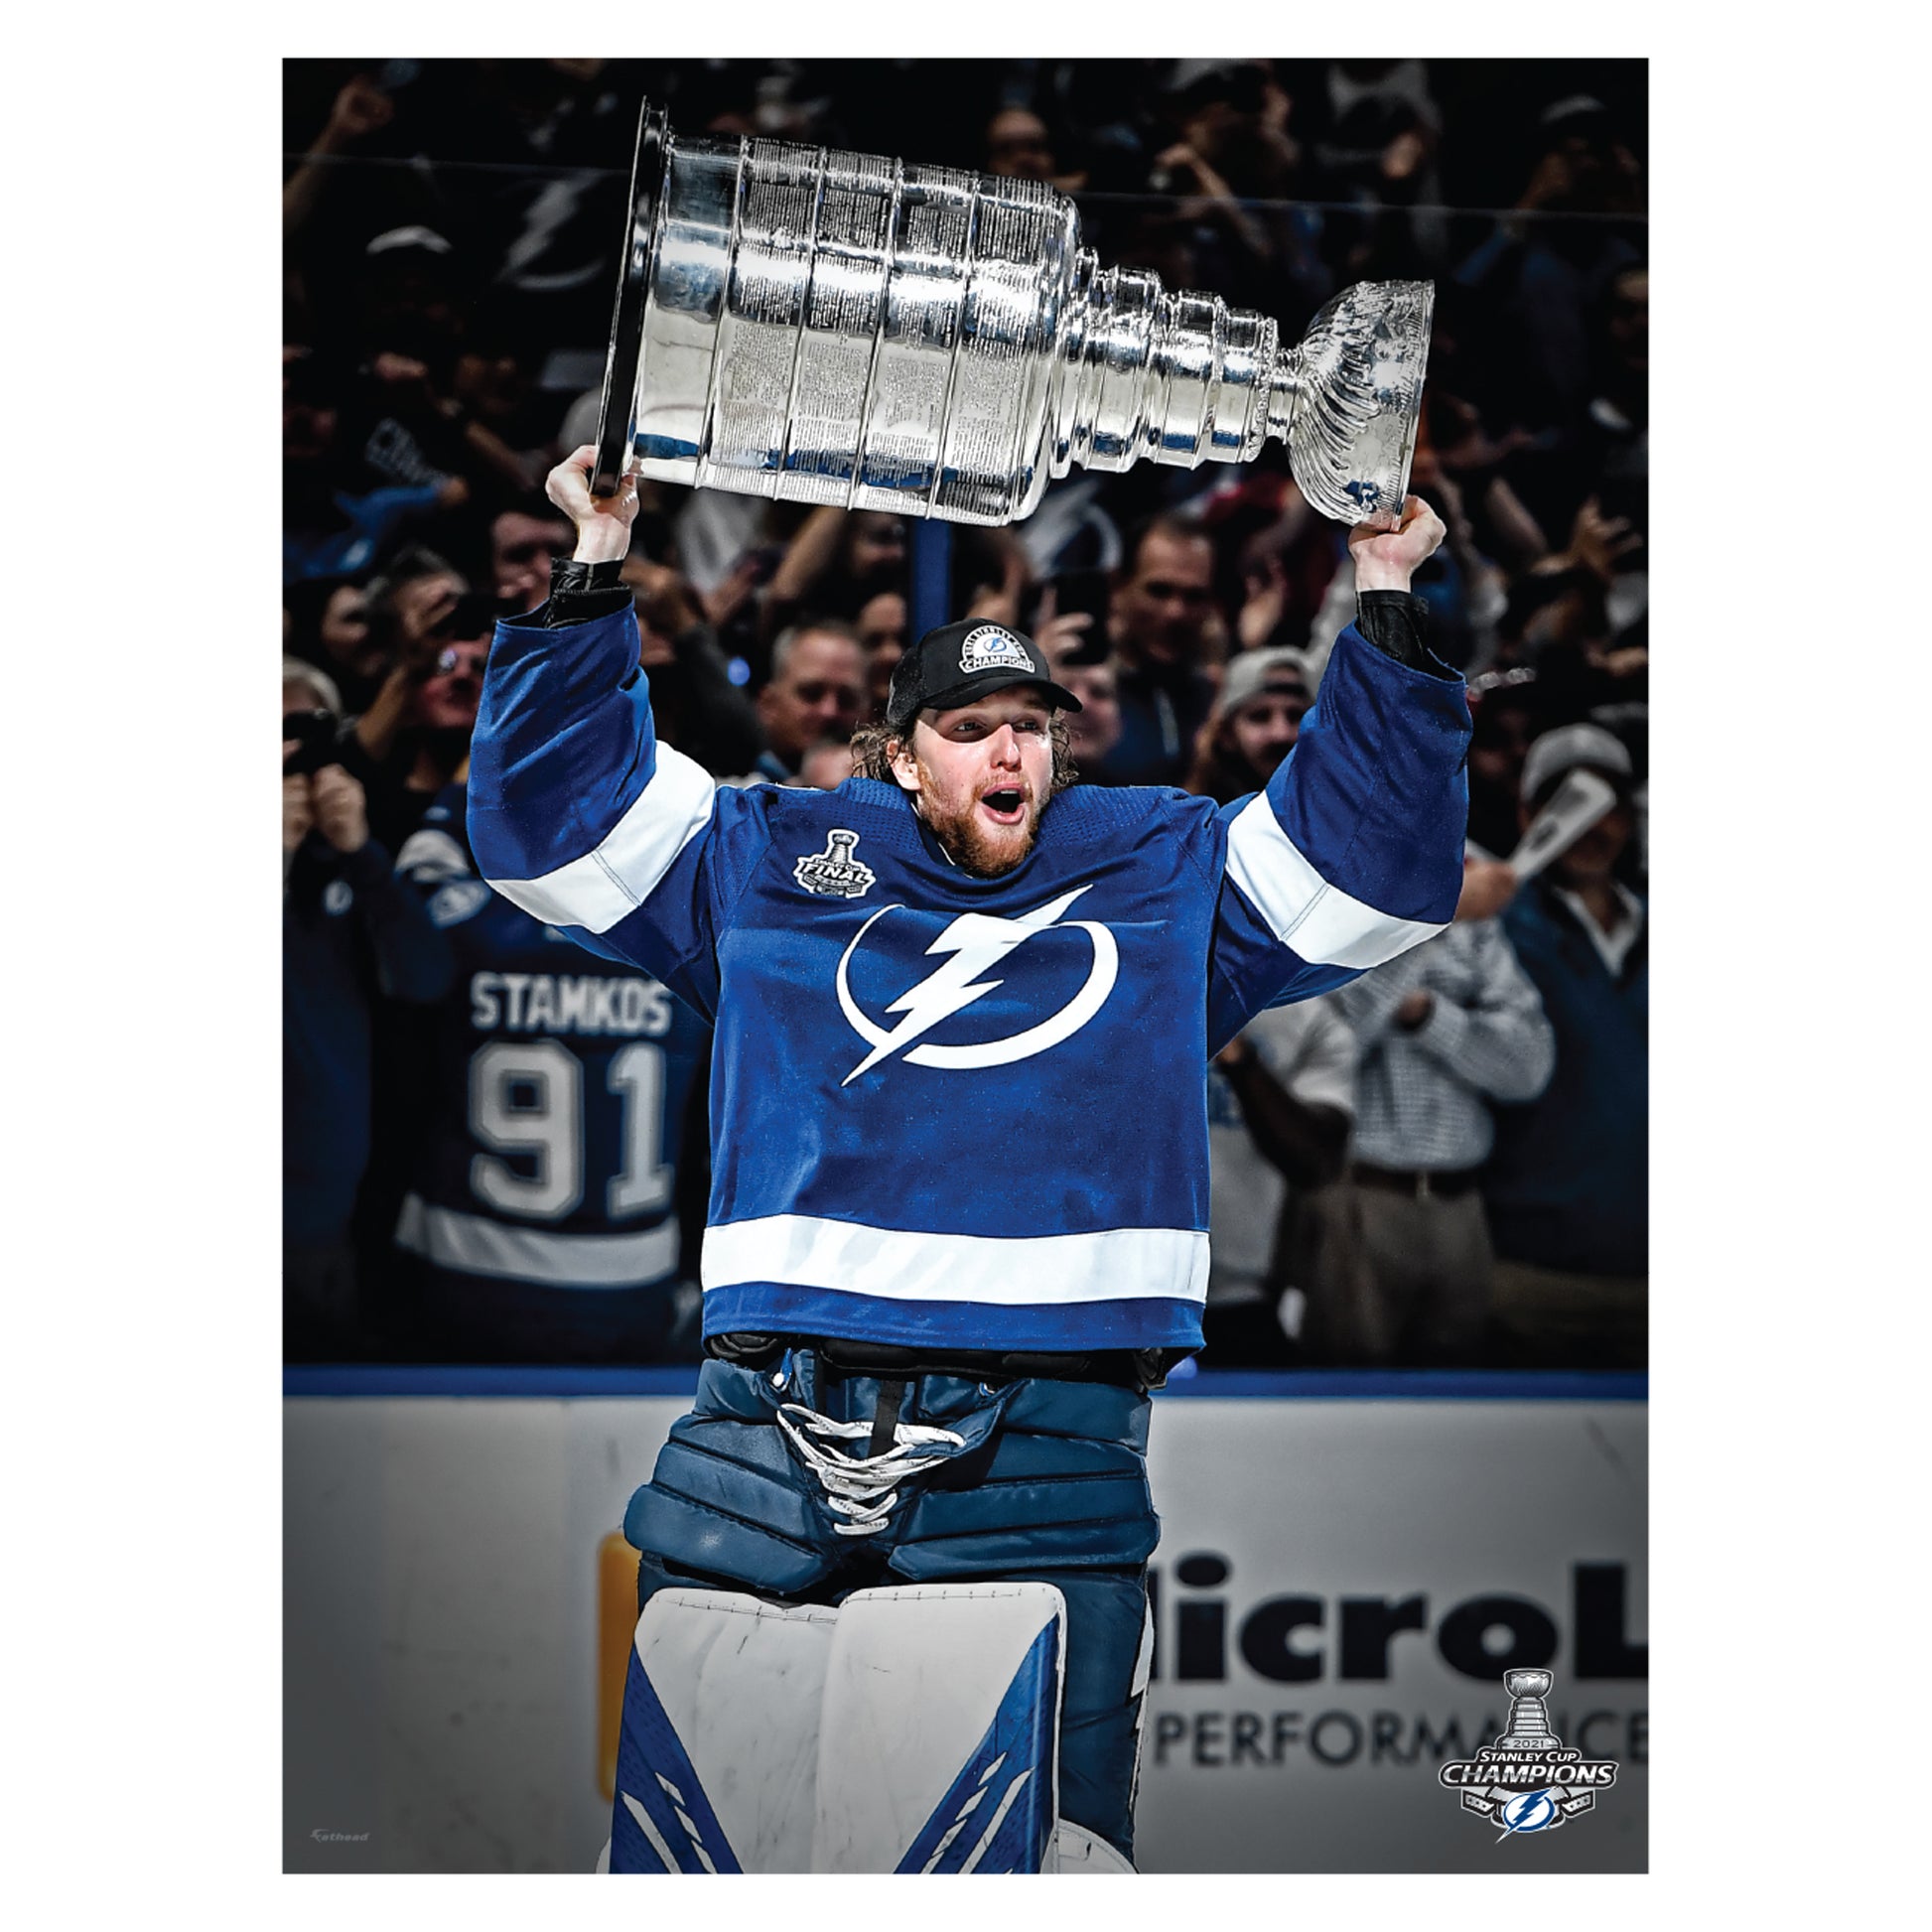 Stanley Cup 2021 League Champion Tampa Bay Lightning Playoff NHL National  Hockey League Sticker Vinyl Decal Laptop Water Bottle Car Scrapbook (2021